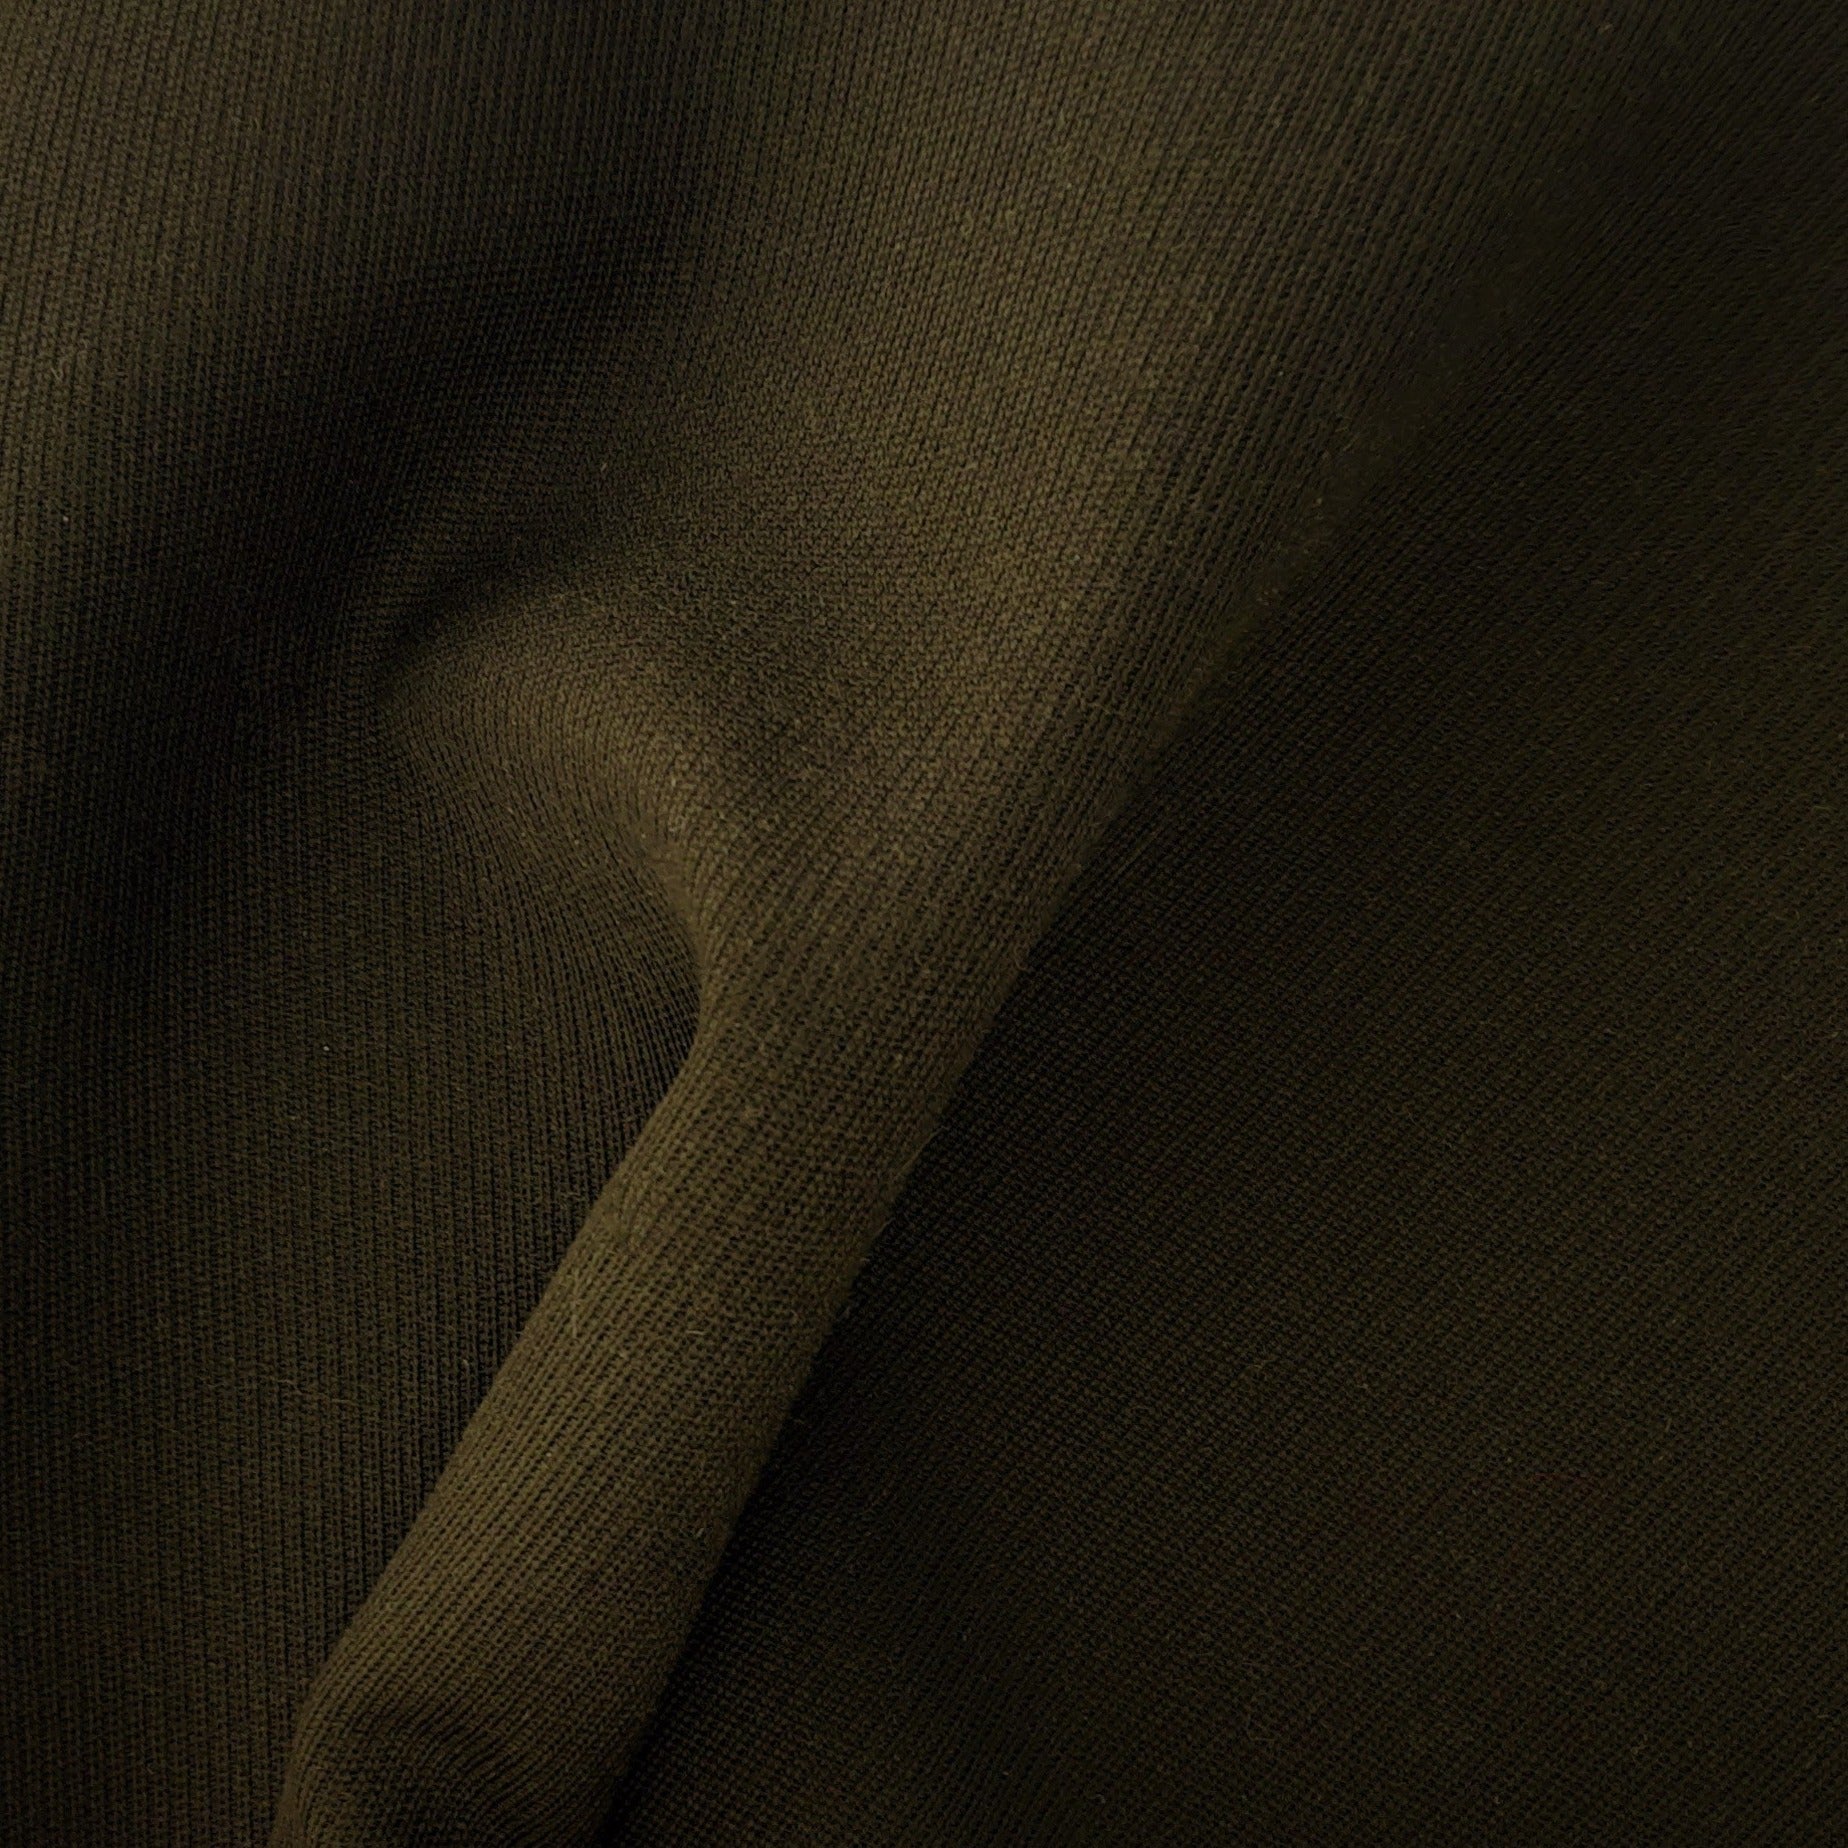 Olive #S206 Poly/Wool "Made In America" Suiting Woven Fabric - SKU 6794